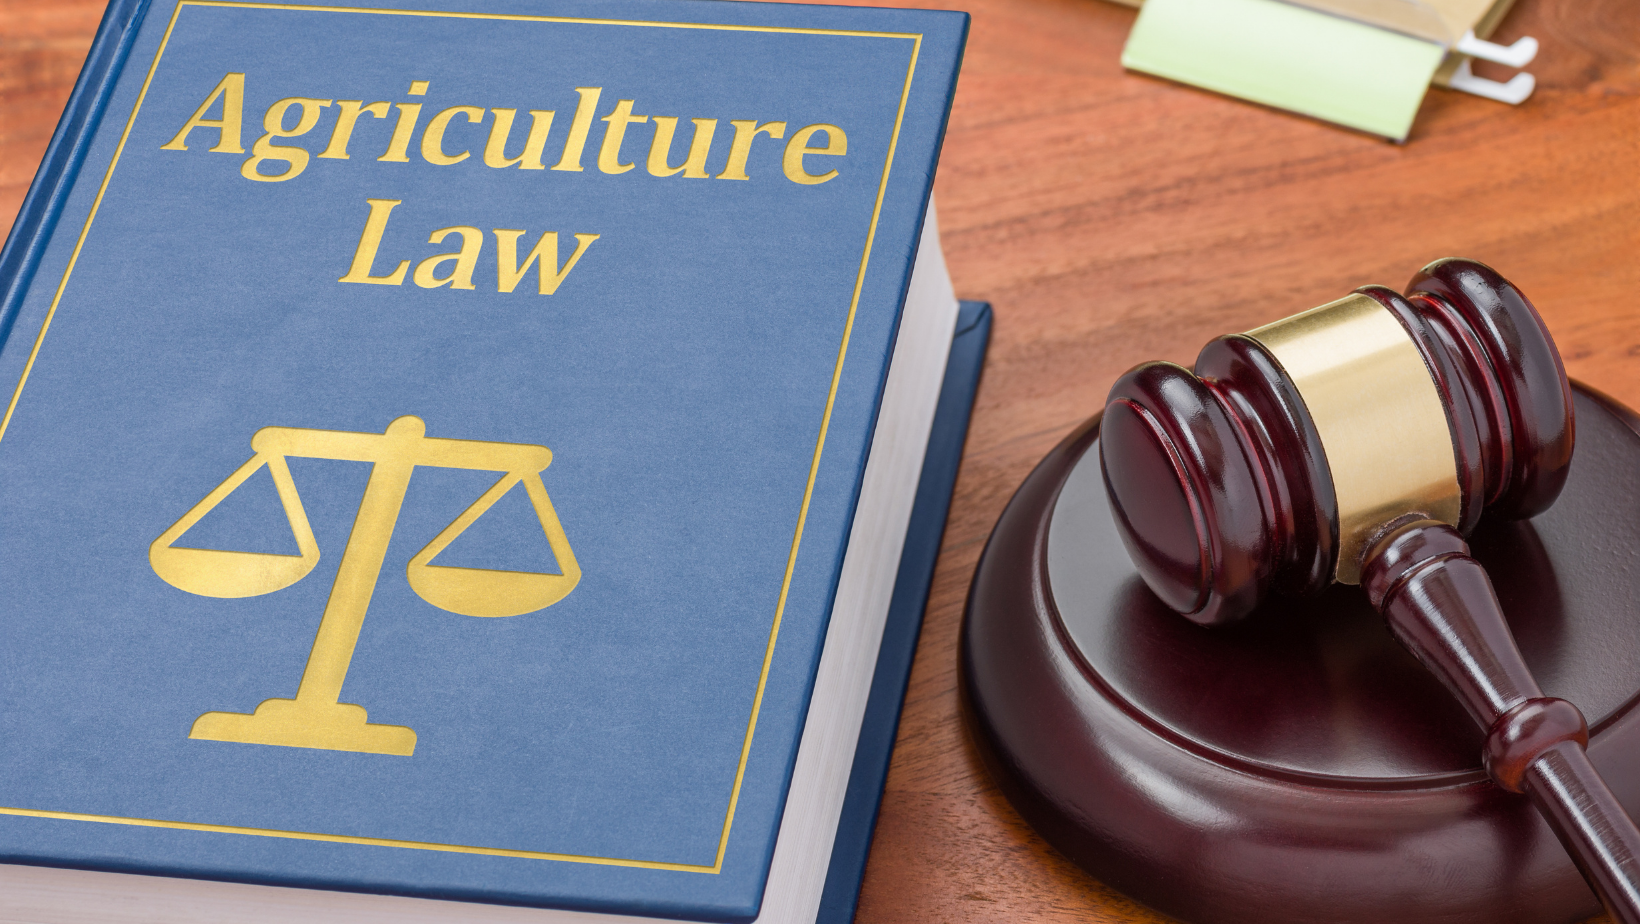 The Supreme Court and Agriculture